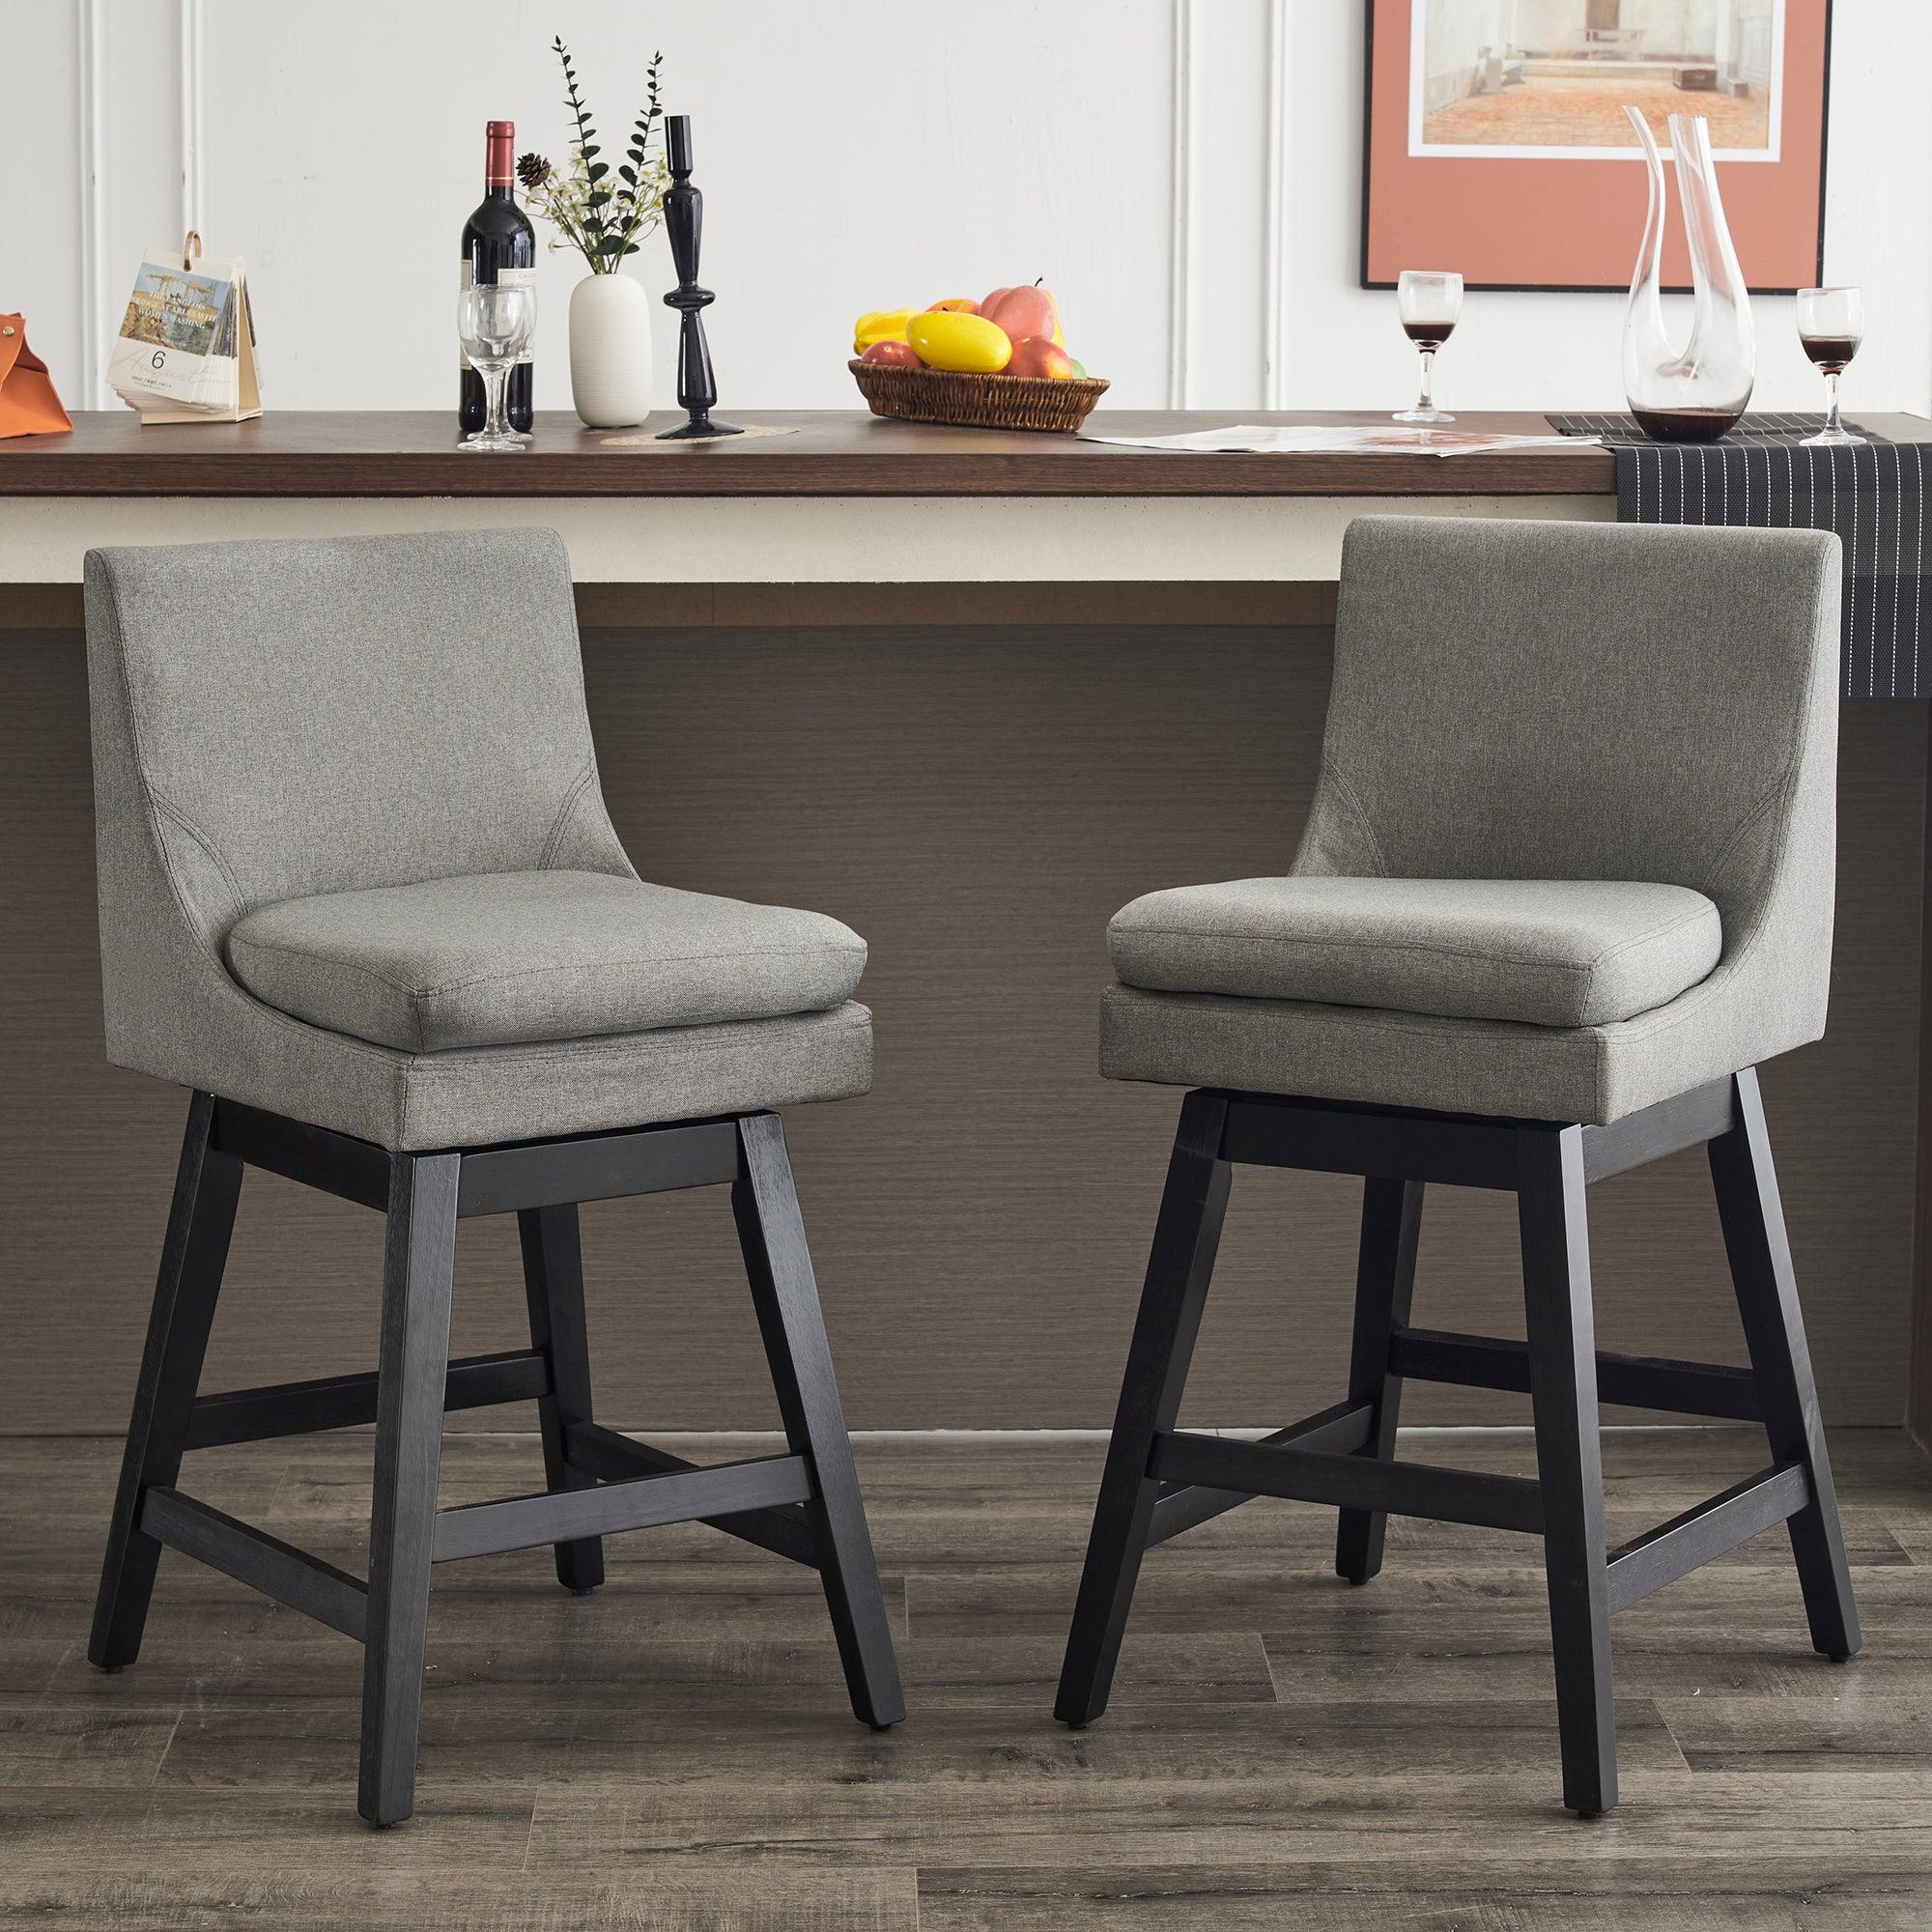 26" Upholstered Swivel Bar Stools Set of 2, Modern Linen Fabric High Back Counter Stools with Ergonomic Design and Wood Frame